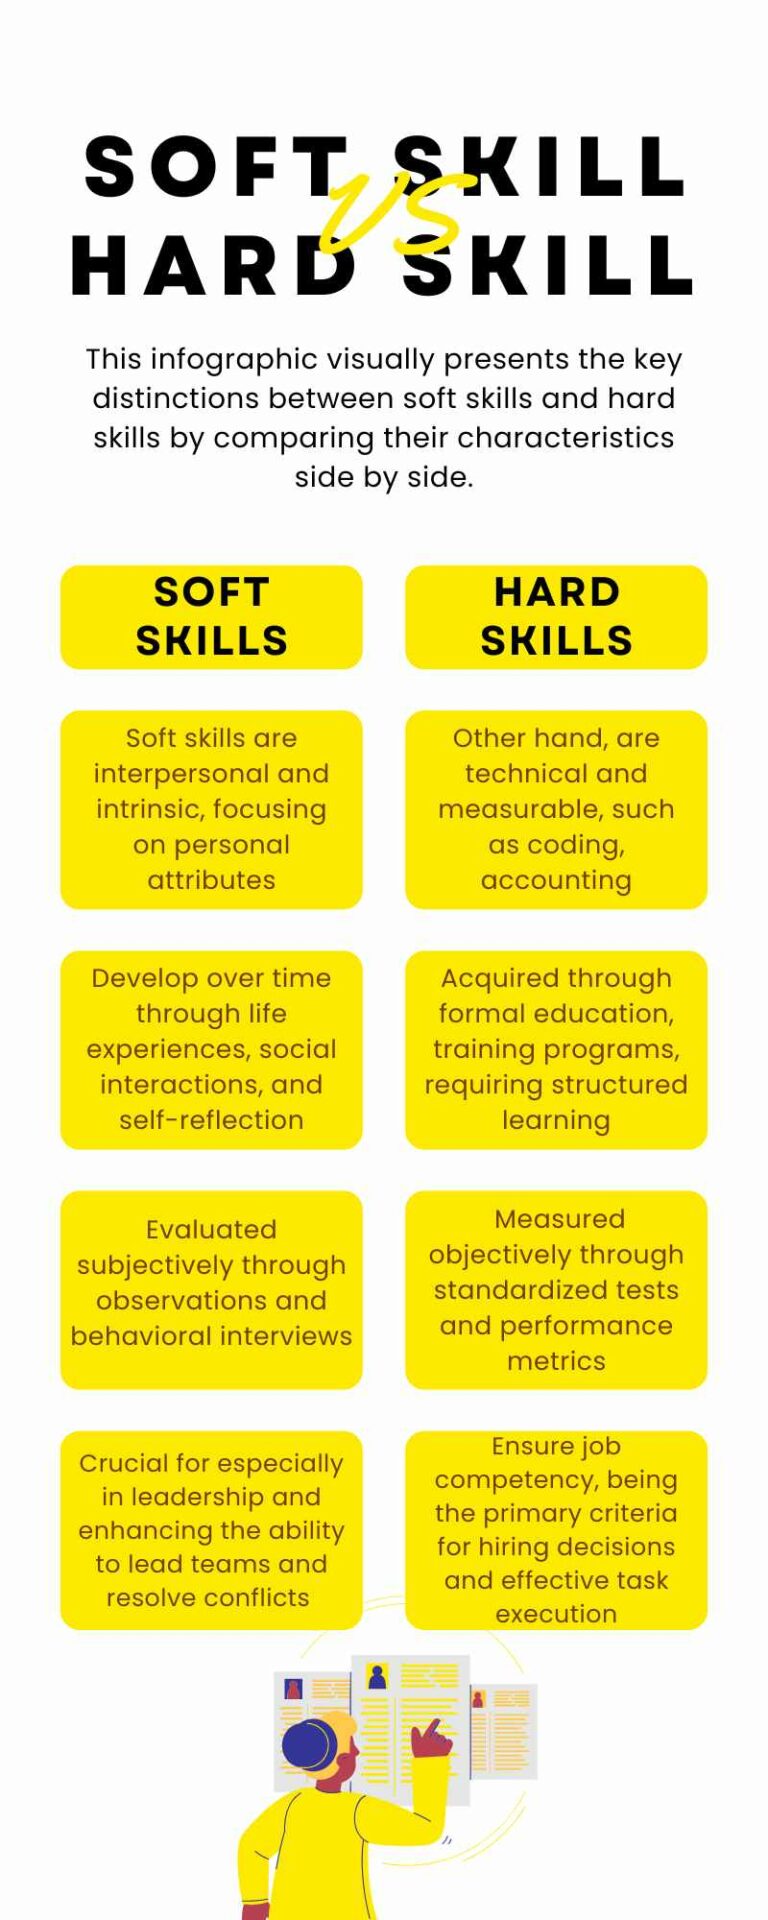 Infographic titled 'Soft Skills vs. Hard Skills' explaining the key differences between the two. The left side lists characteristics of soft skills, and the right side lists characteristics of hard skills, highlighting their distinct attributes and importance in the workplace.